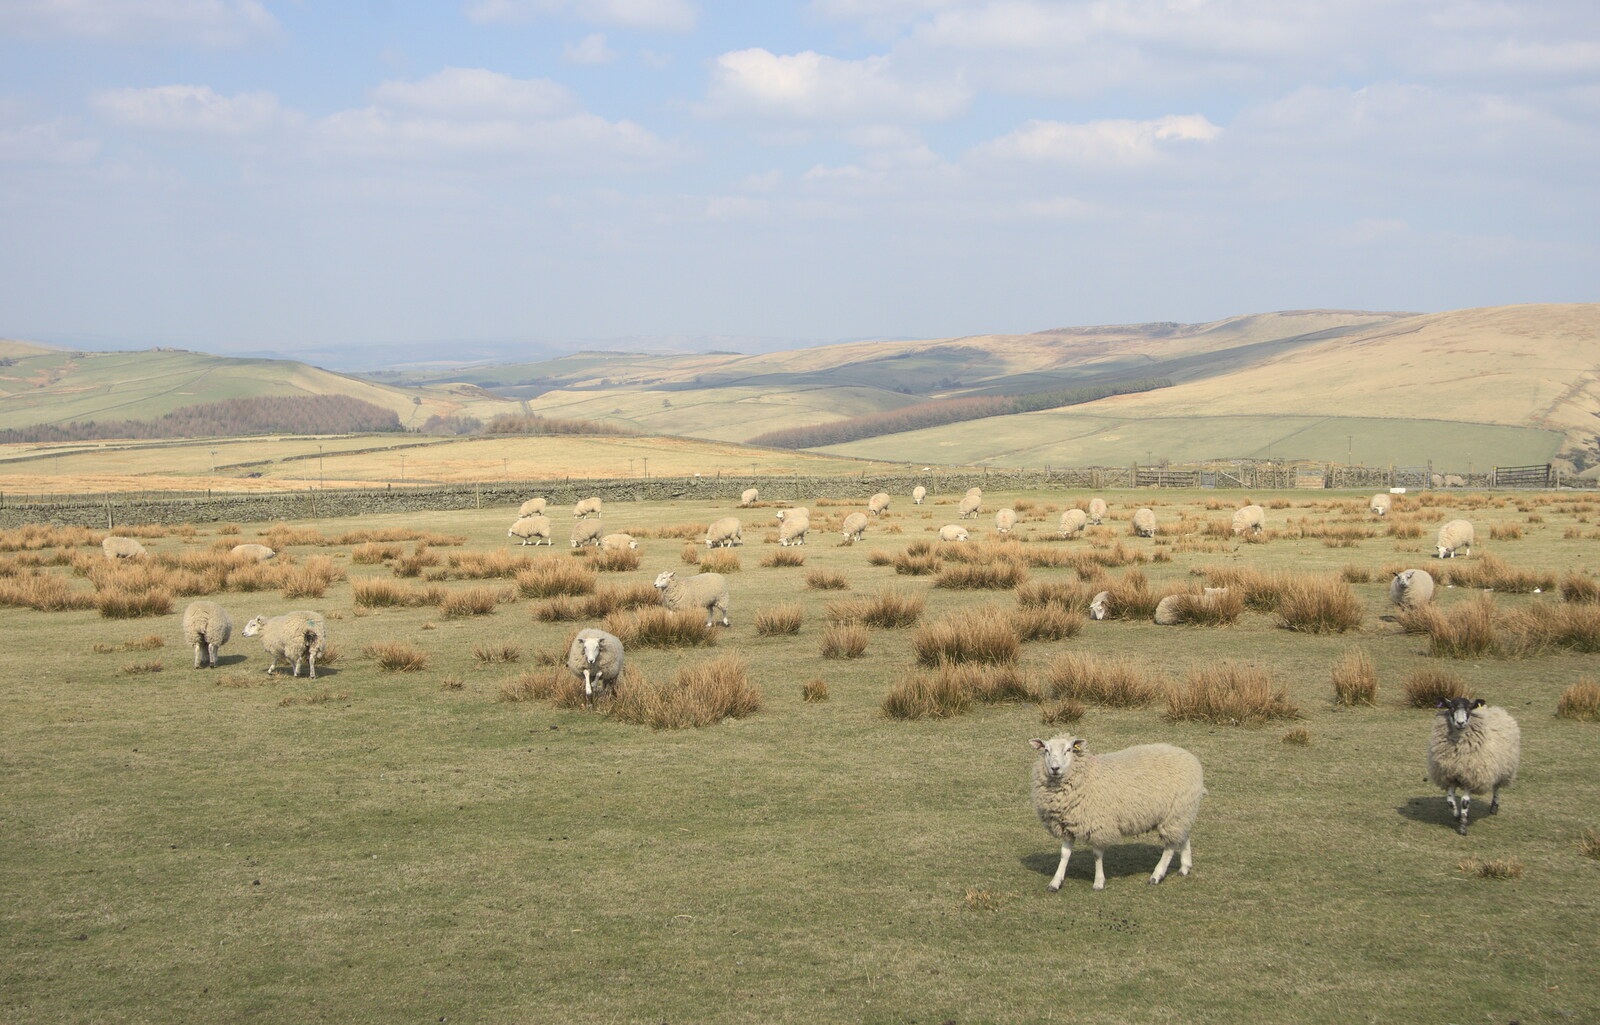 Derbyshire sheep on the Cat and Fiddle pass from Chesterfield and the Twisty Spire, Derbyshire - 19th April 2013